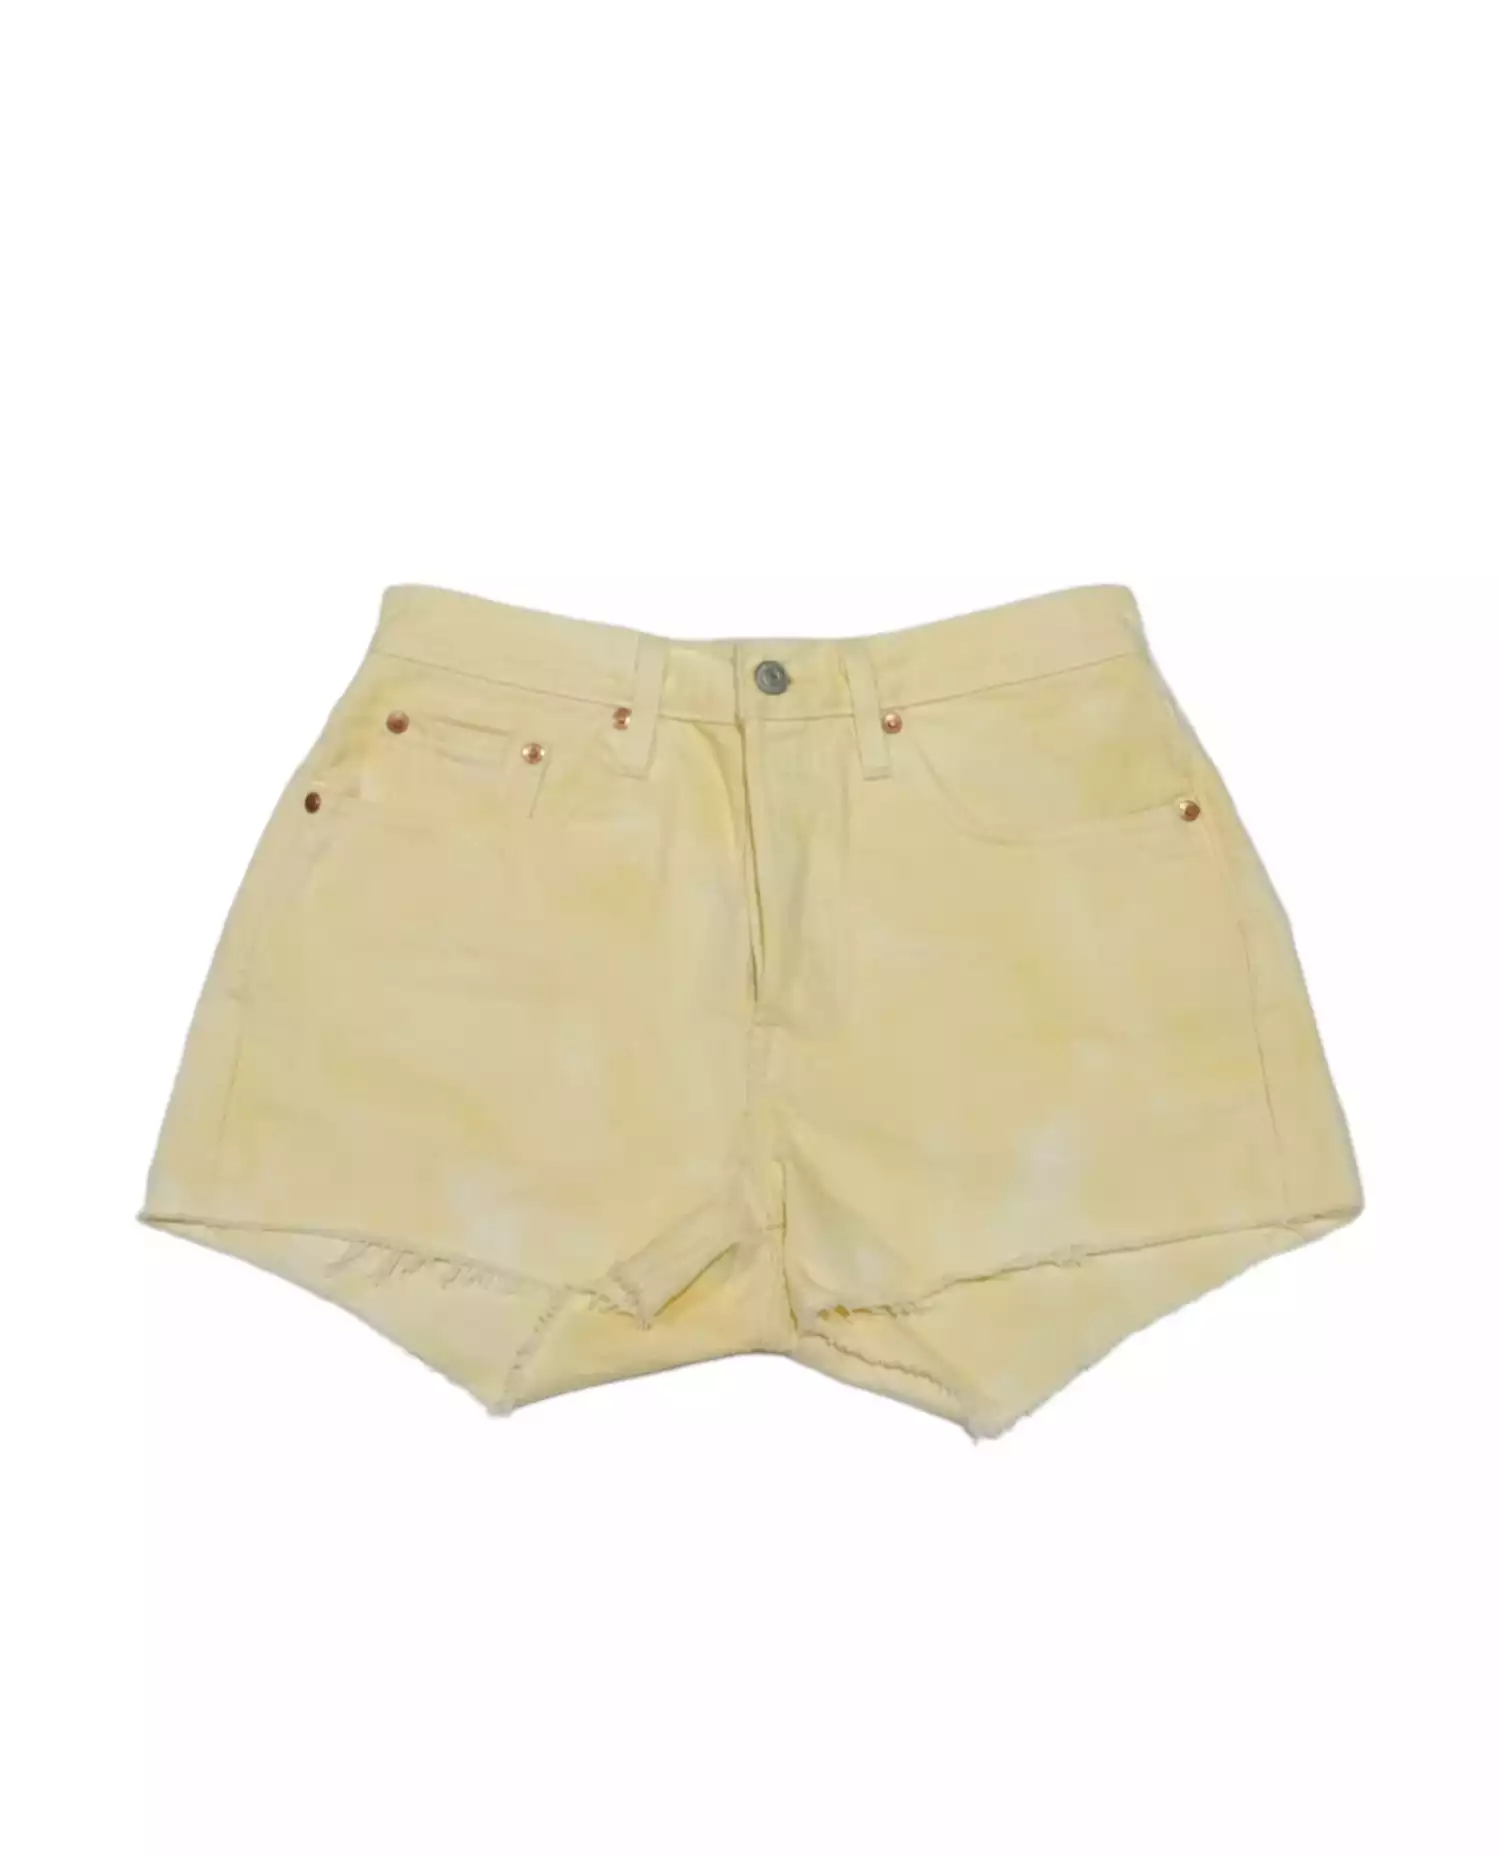 Shorts by Levi's